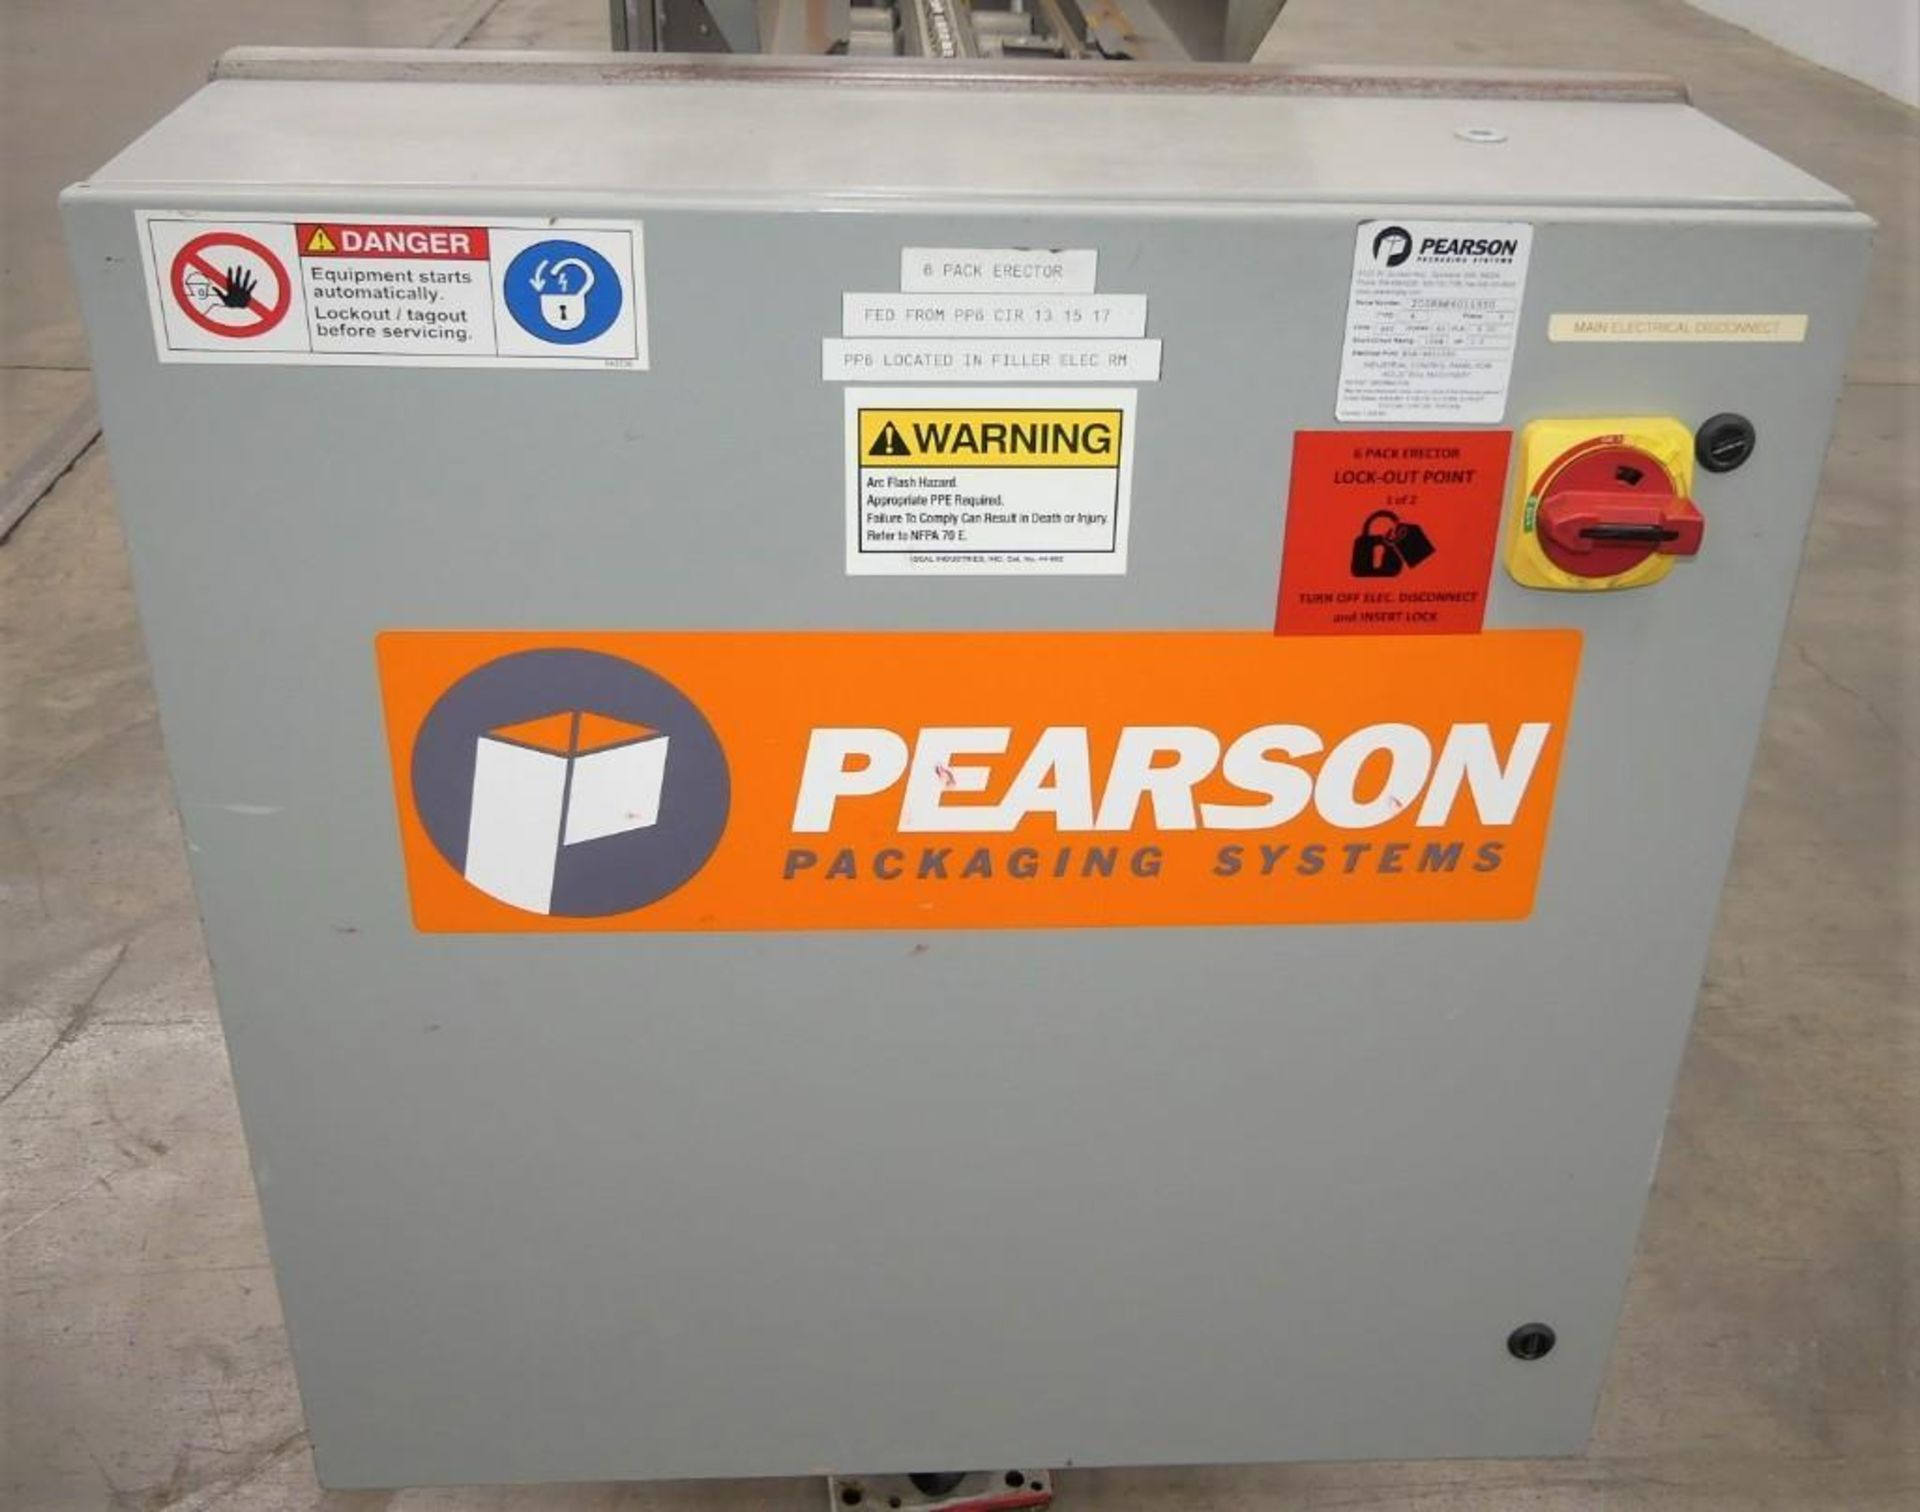 Pearson BE60 6-Pack Beverage Carrier Erector with Twin Lane Conveyor - Image 17 of 21